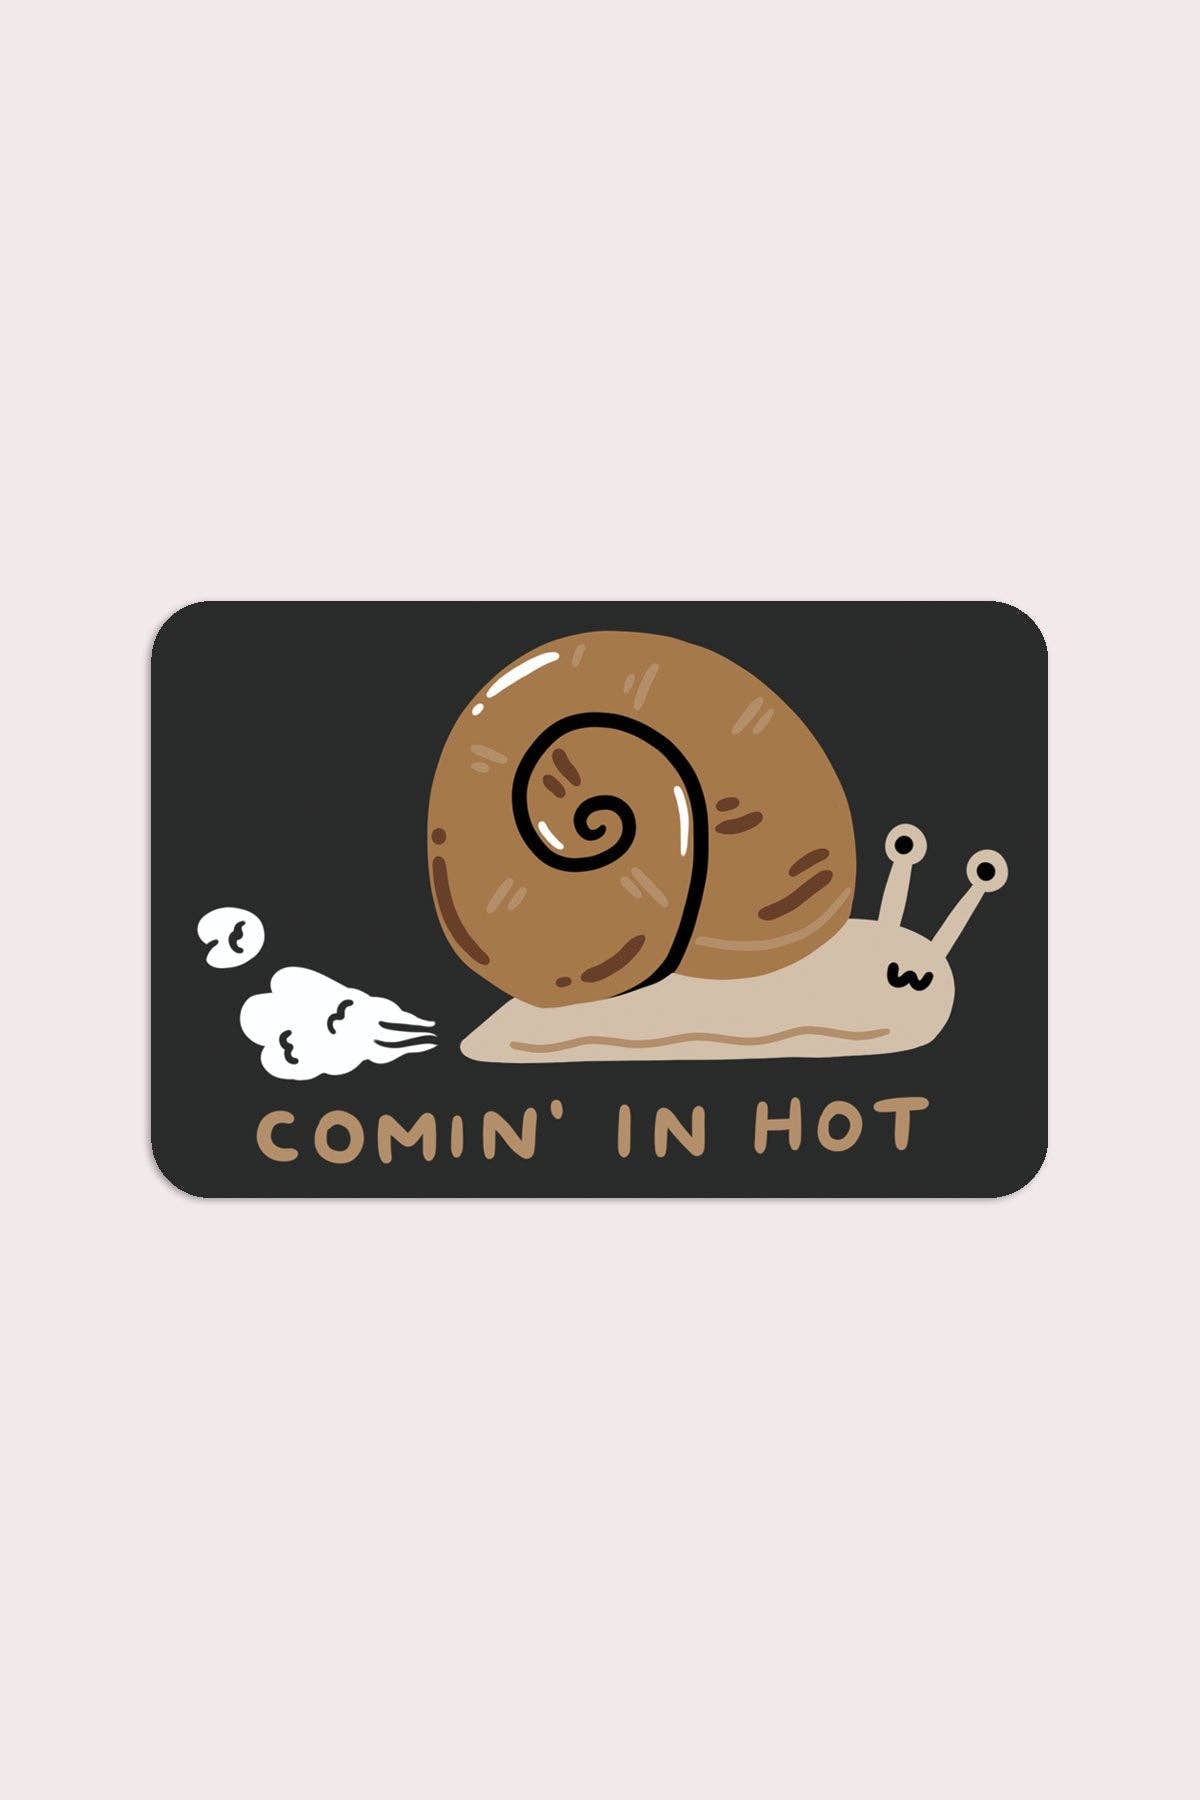 Comin' In Hot Vinyl Sticker - Out of the Blue